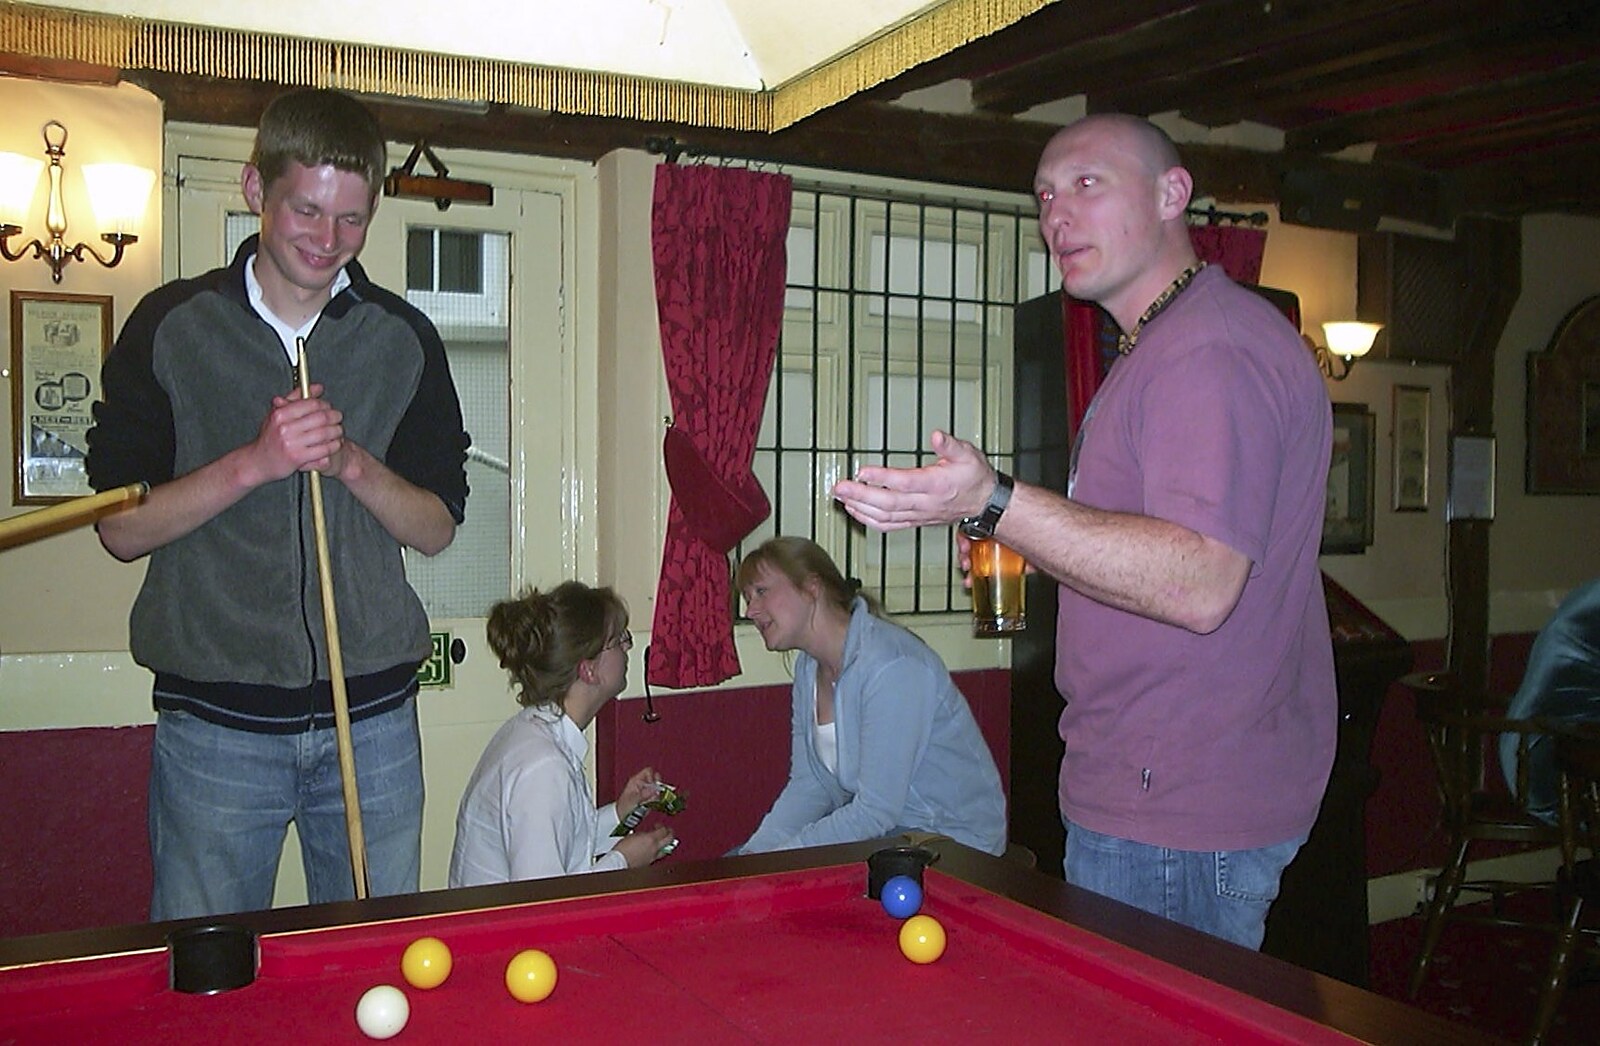 The BSCC Annual Bike Ride, Lenham, Kent - 8th May 2004: We play the world's most expensive Stick Game